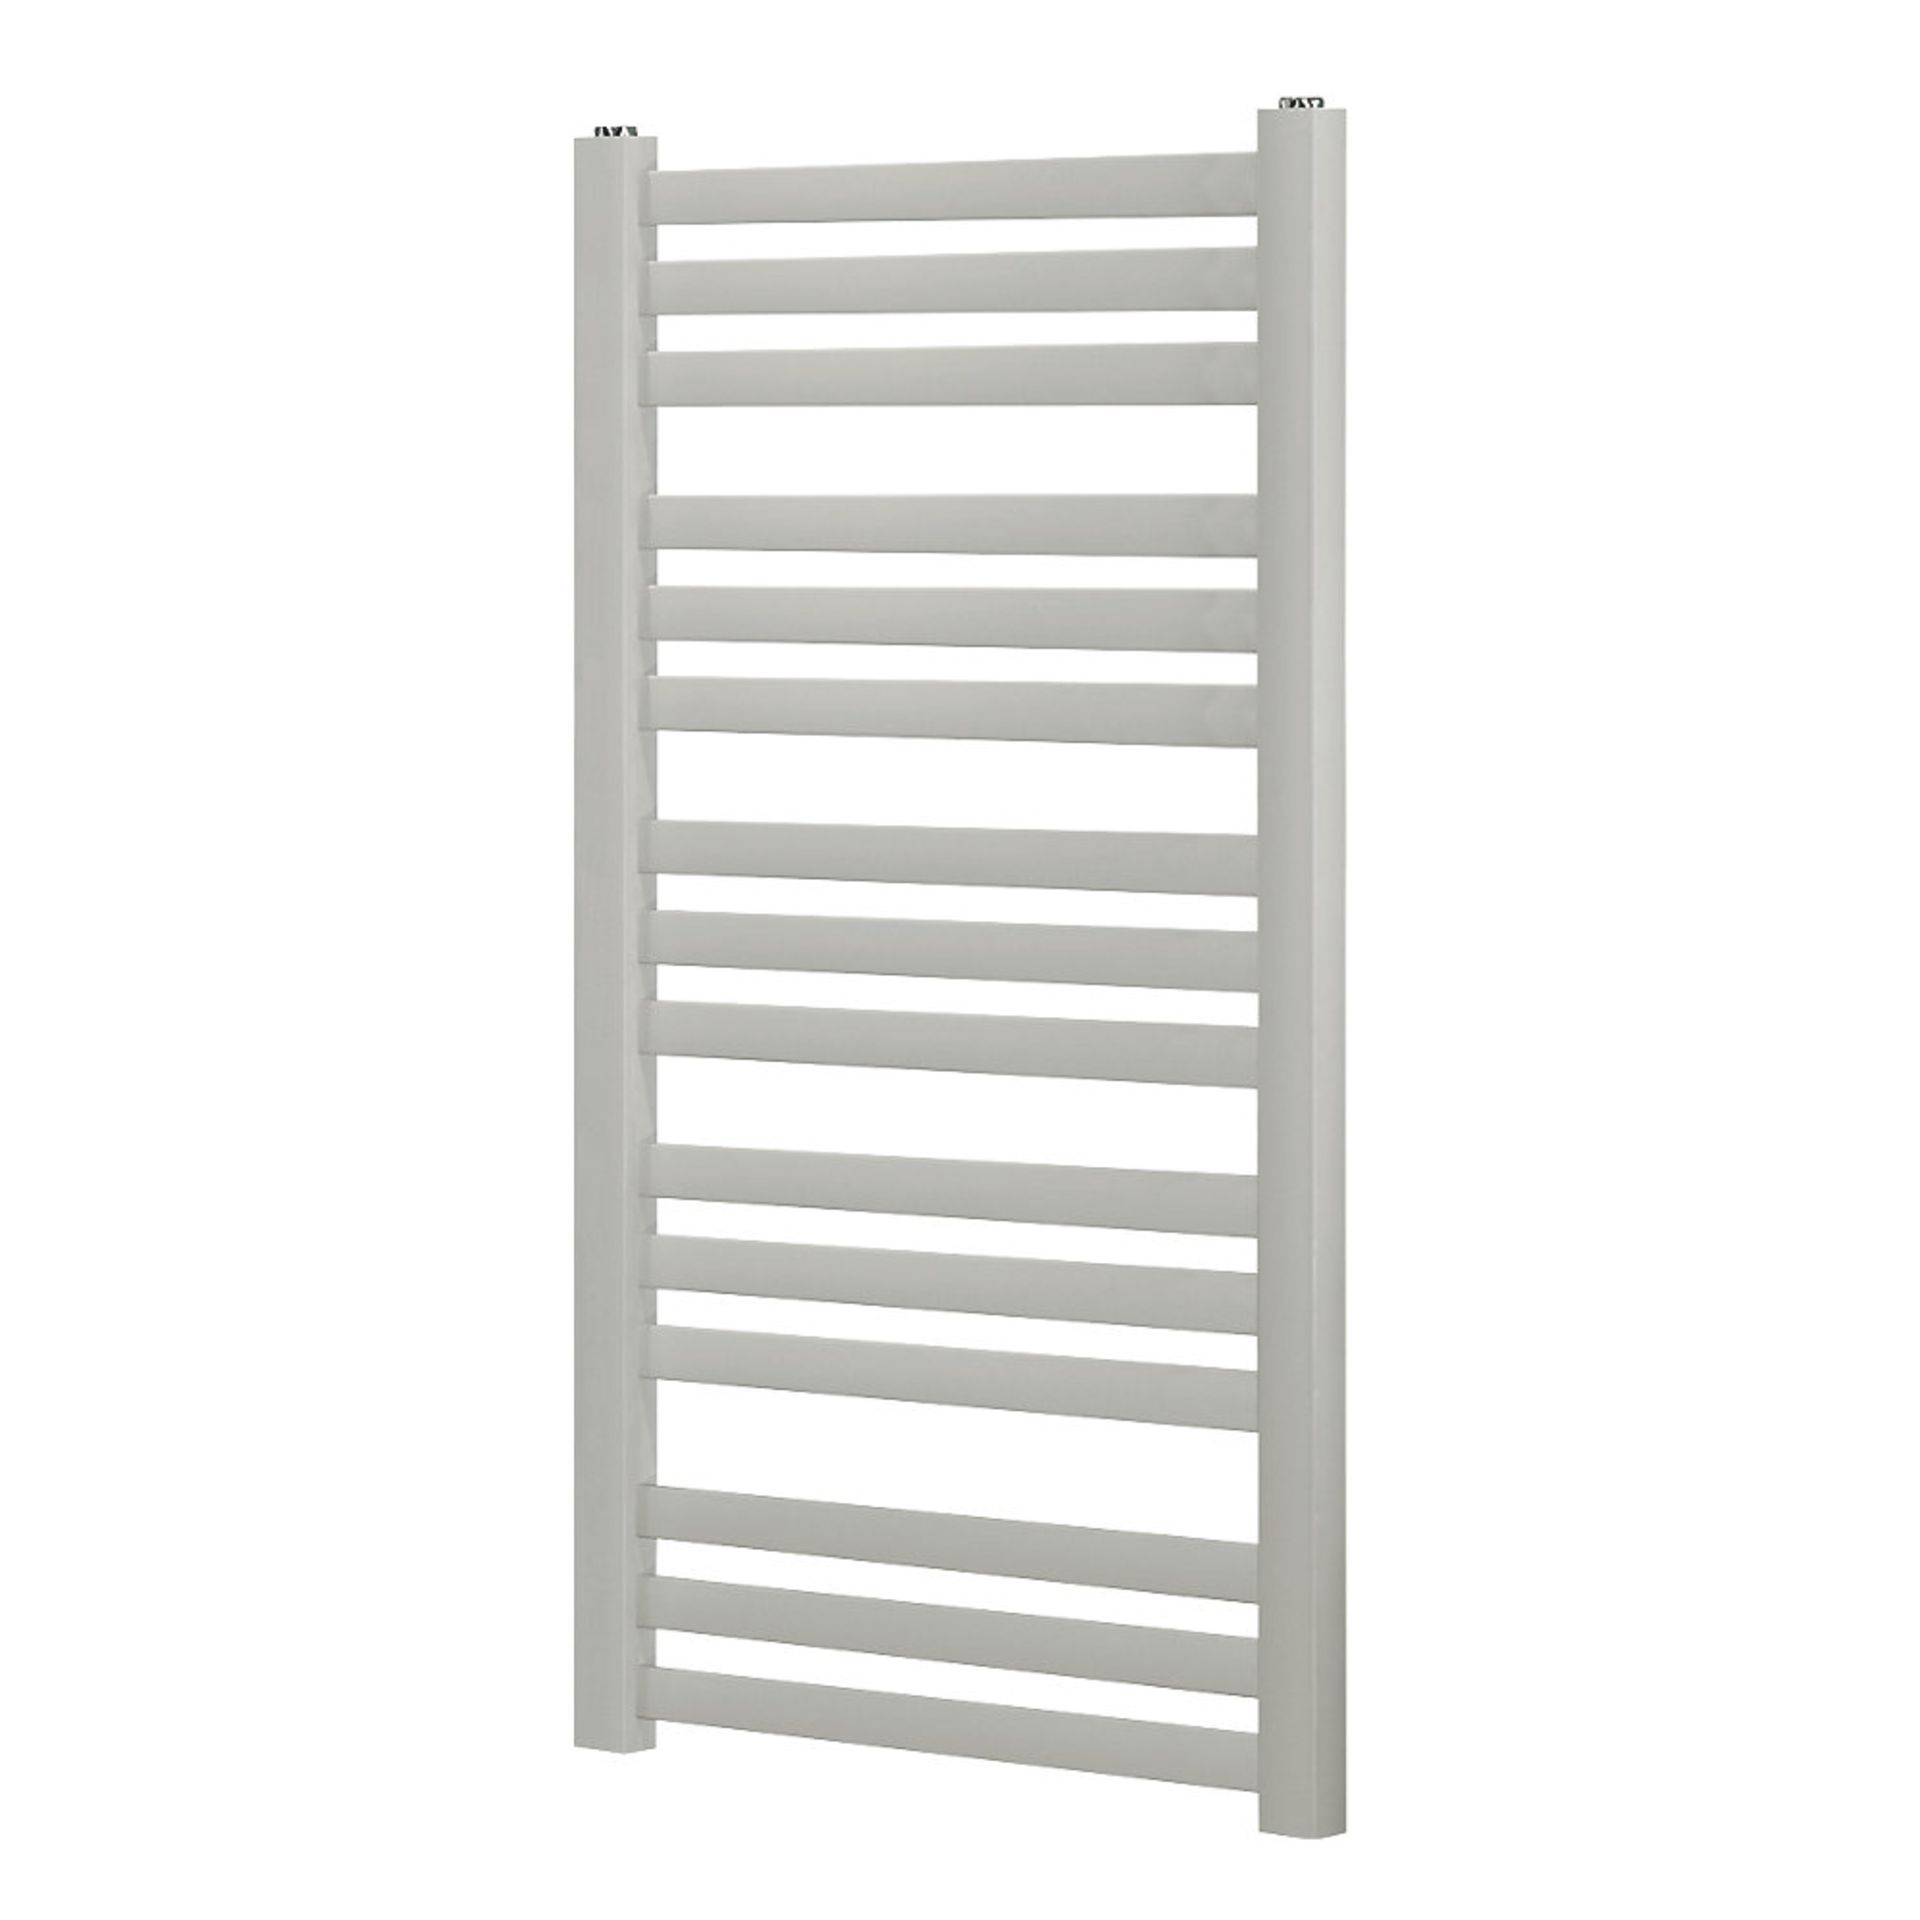 (H29) 900x500mm ANGLED BAR TOWEL RADIATOR SILVER. High quality powder-coated steel construction... - Image 3 of 3